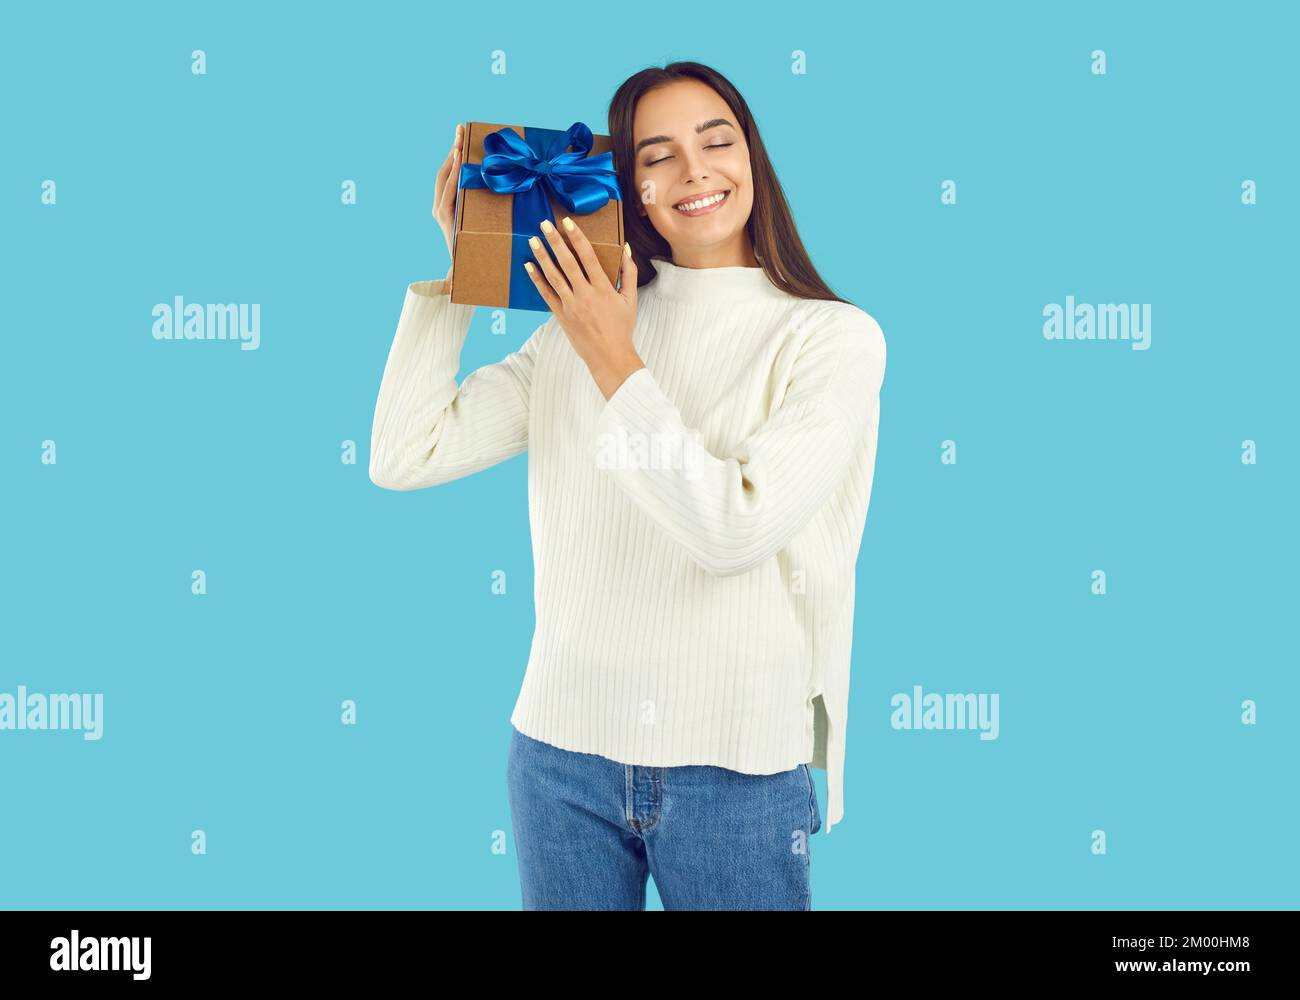 Happy smiling young woman in warm sweater holding gift box with Christmas present Stock Photo